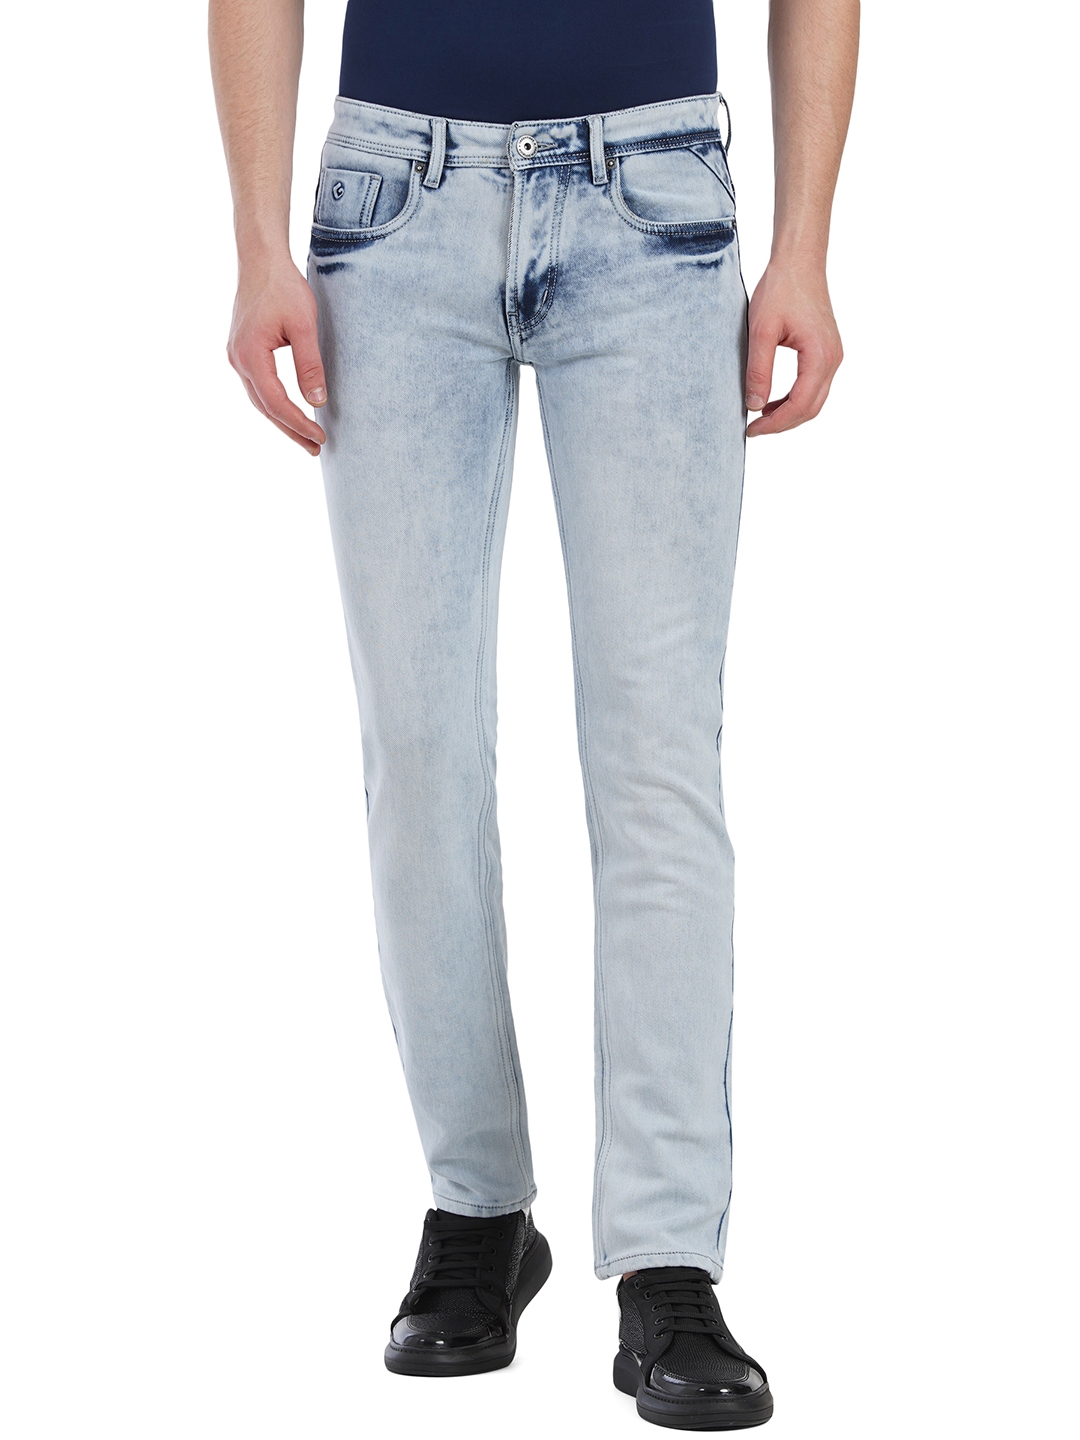 Greenfibre | Light Blue Washed Narrow Fit Jeans | Greenfibre 0